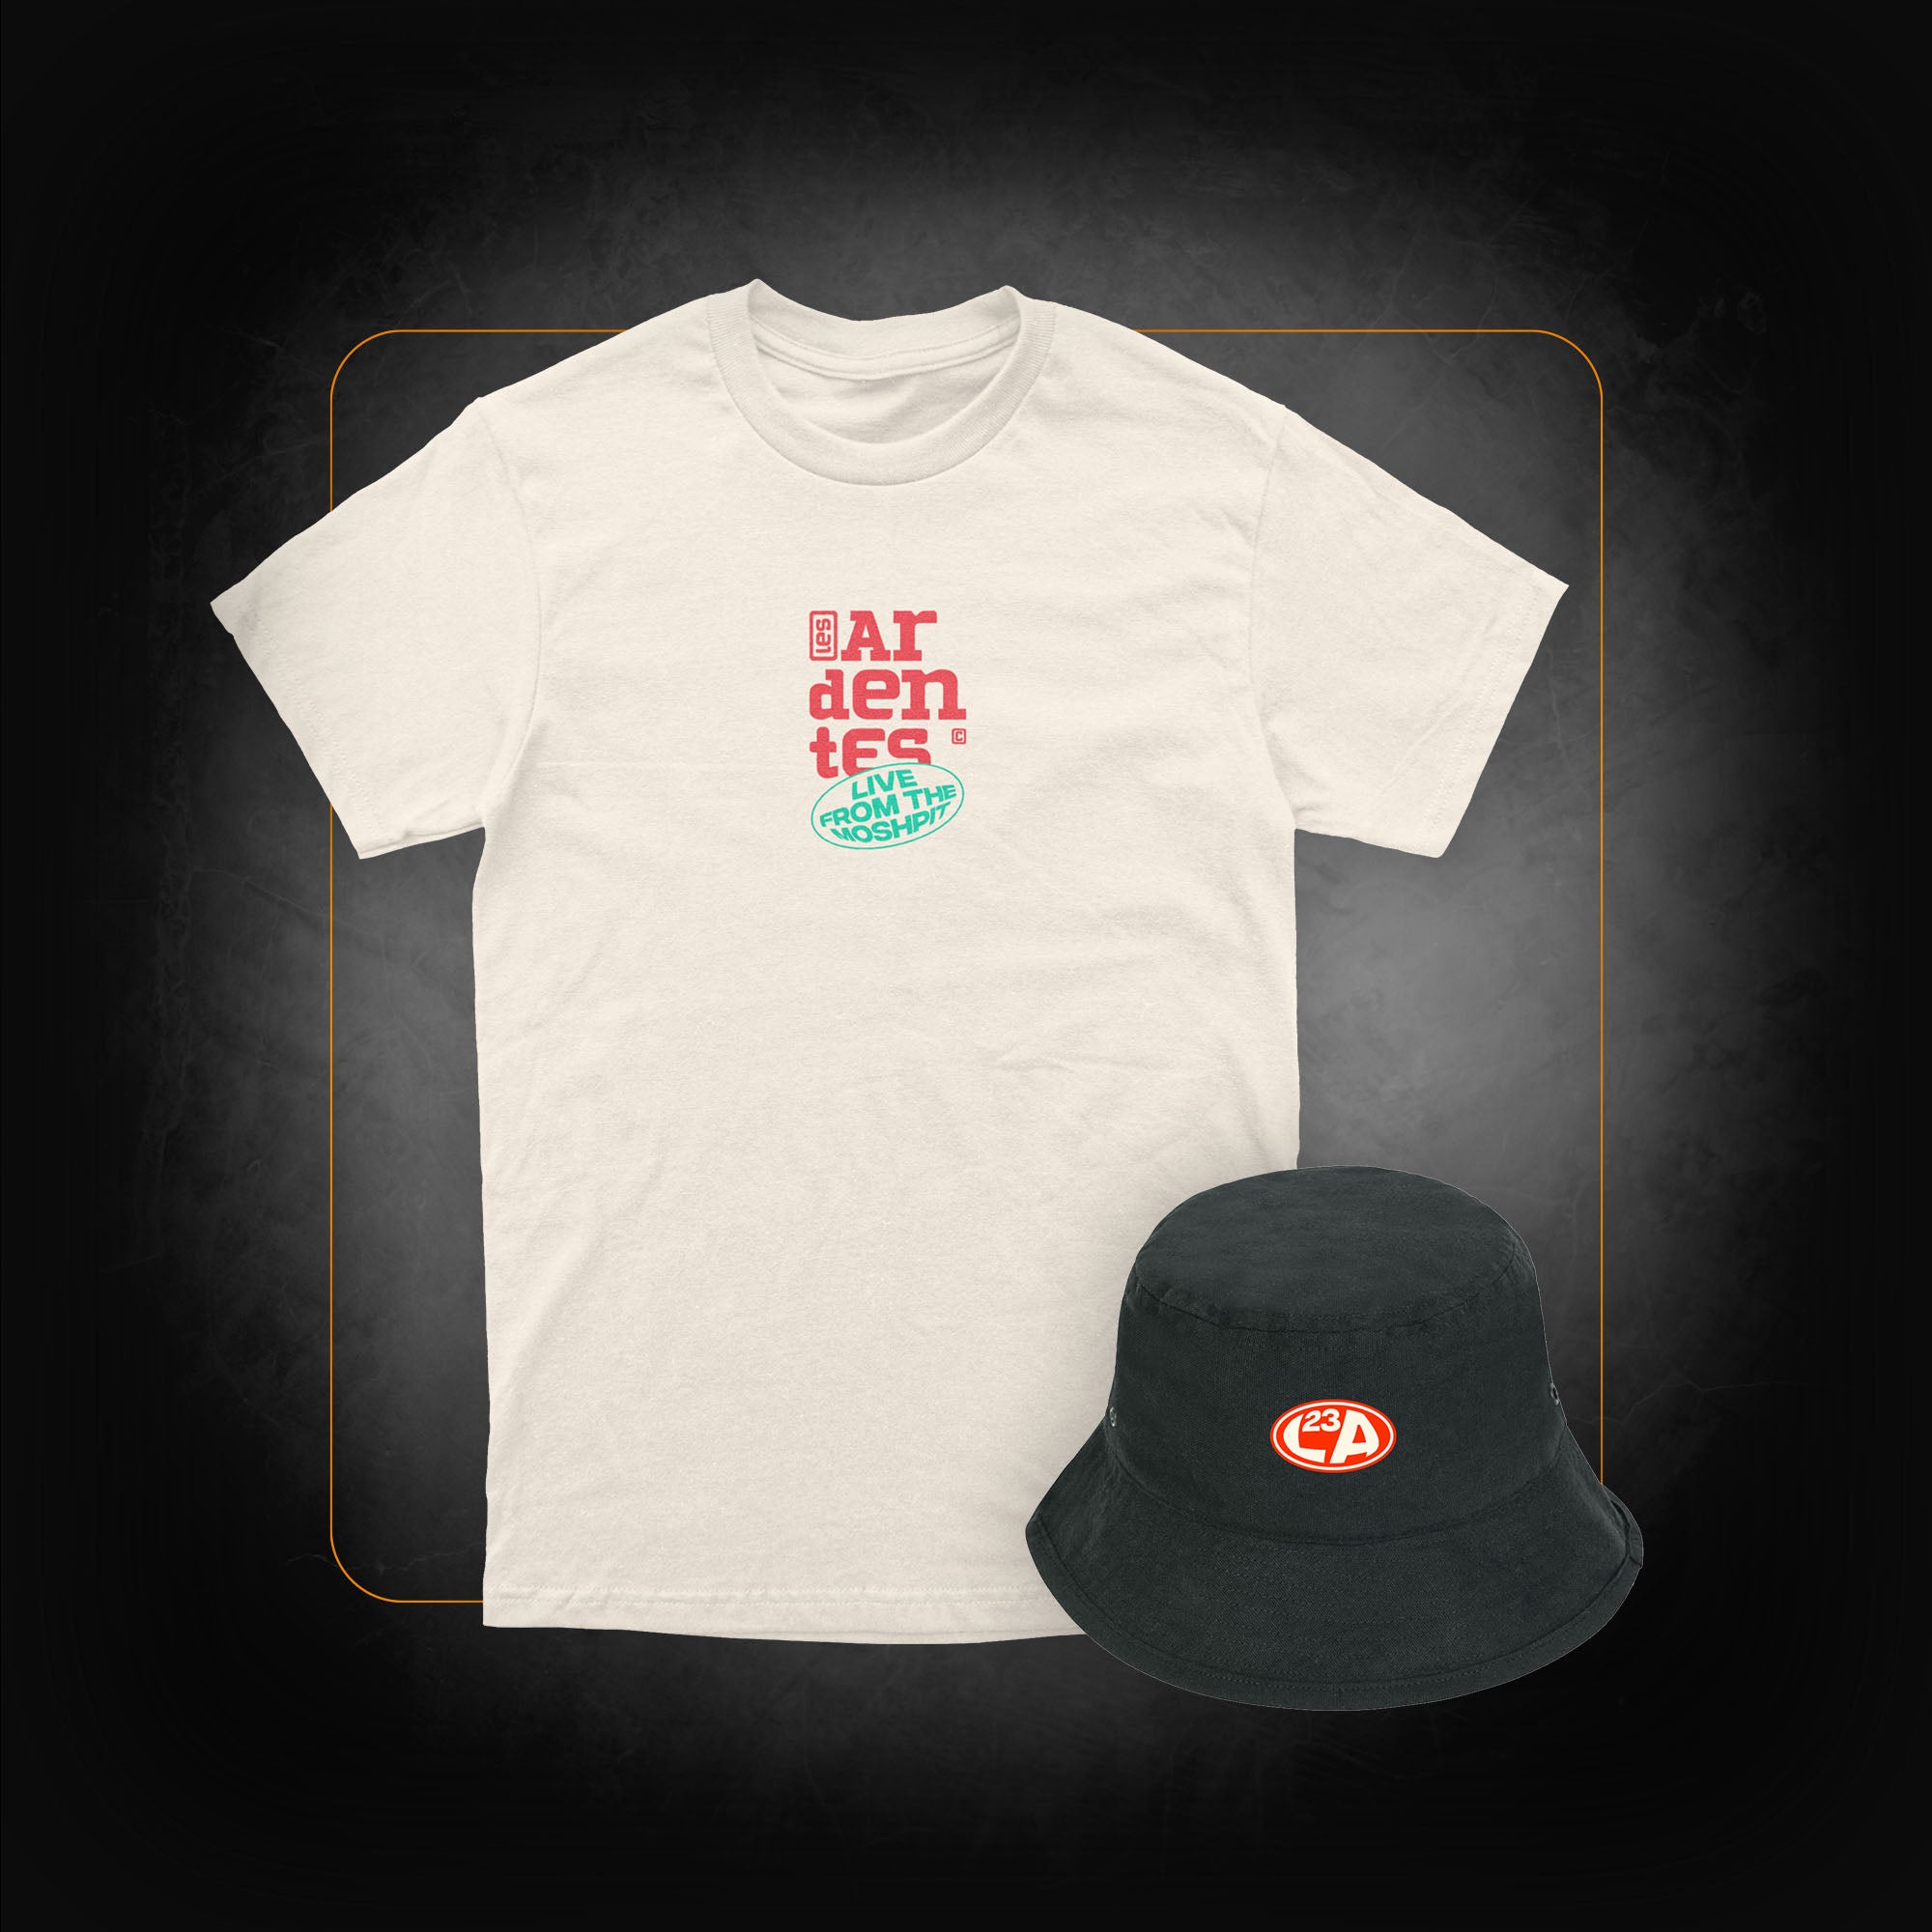 Les Ardentes bucket hat + t-shirt pack